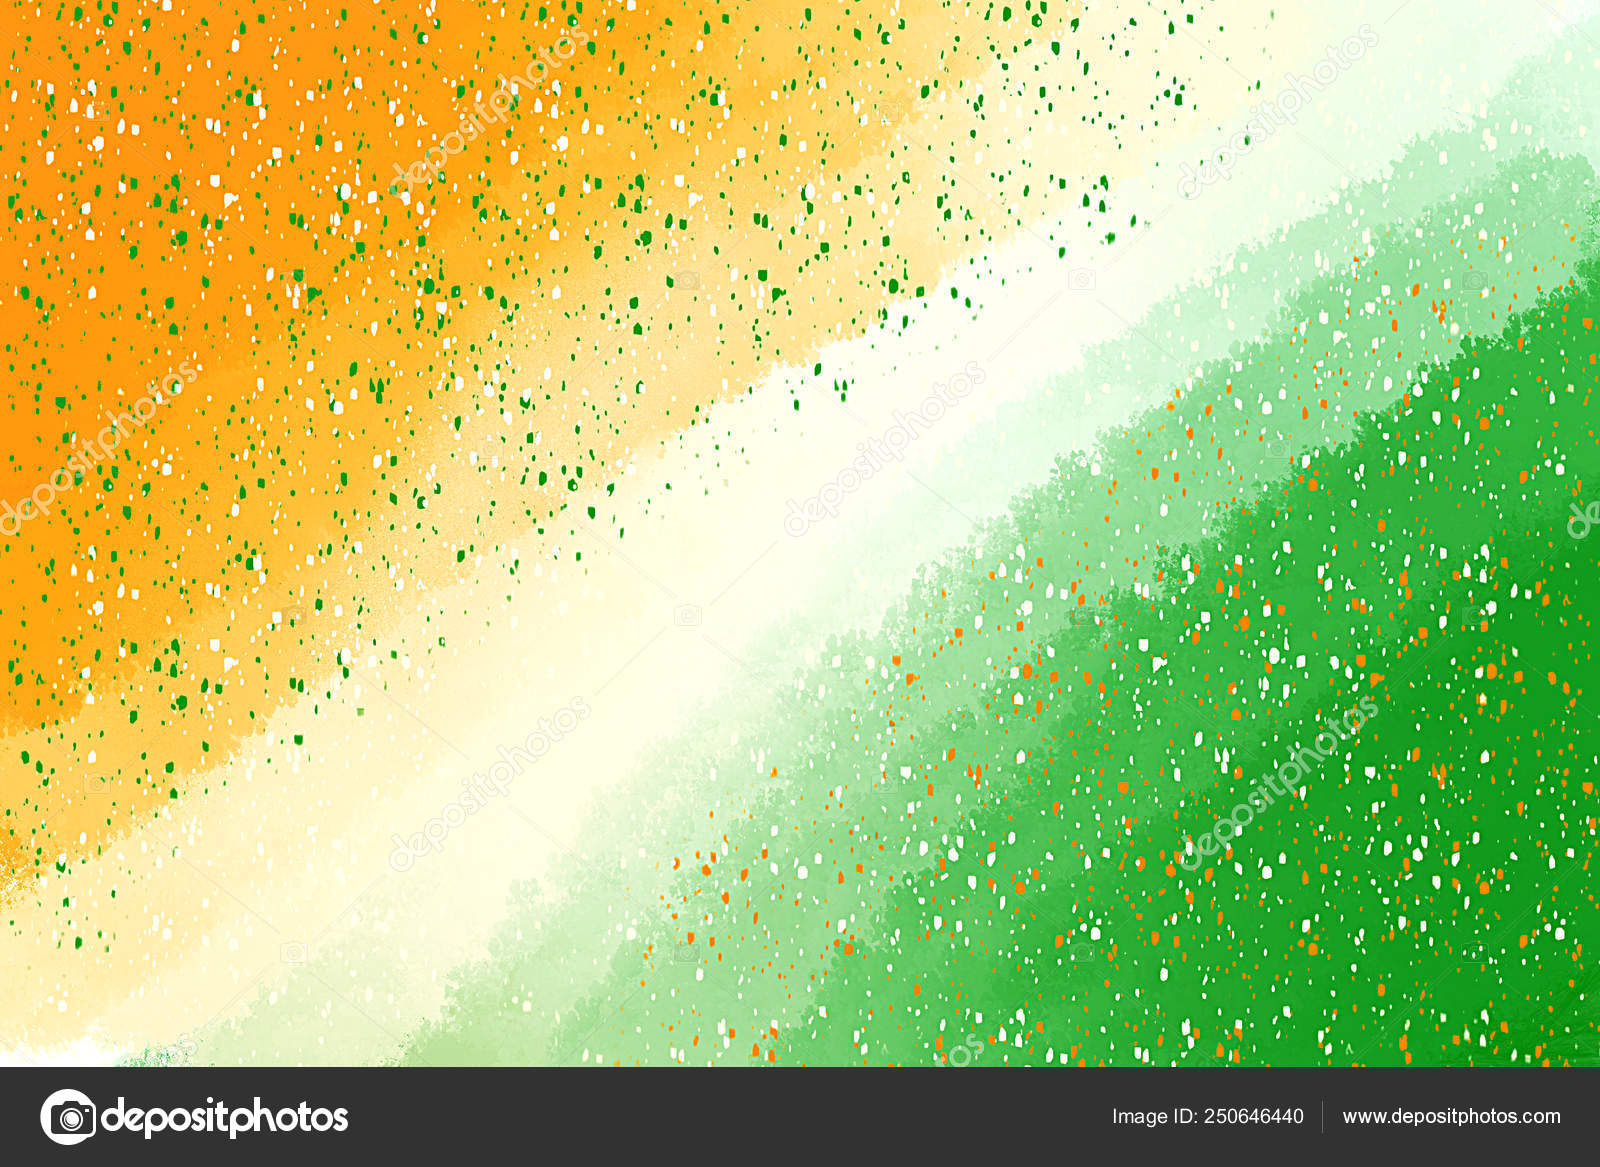 89007 Indian Flag Background Images Stock Photos  Vectors  Shutterstock